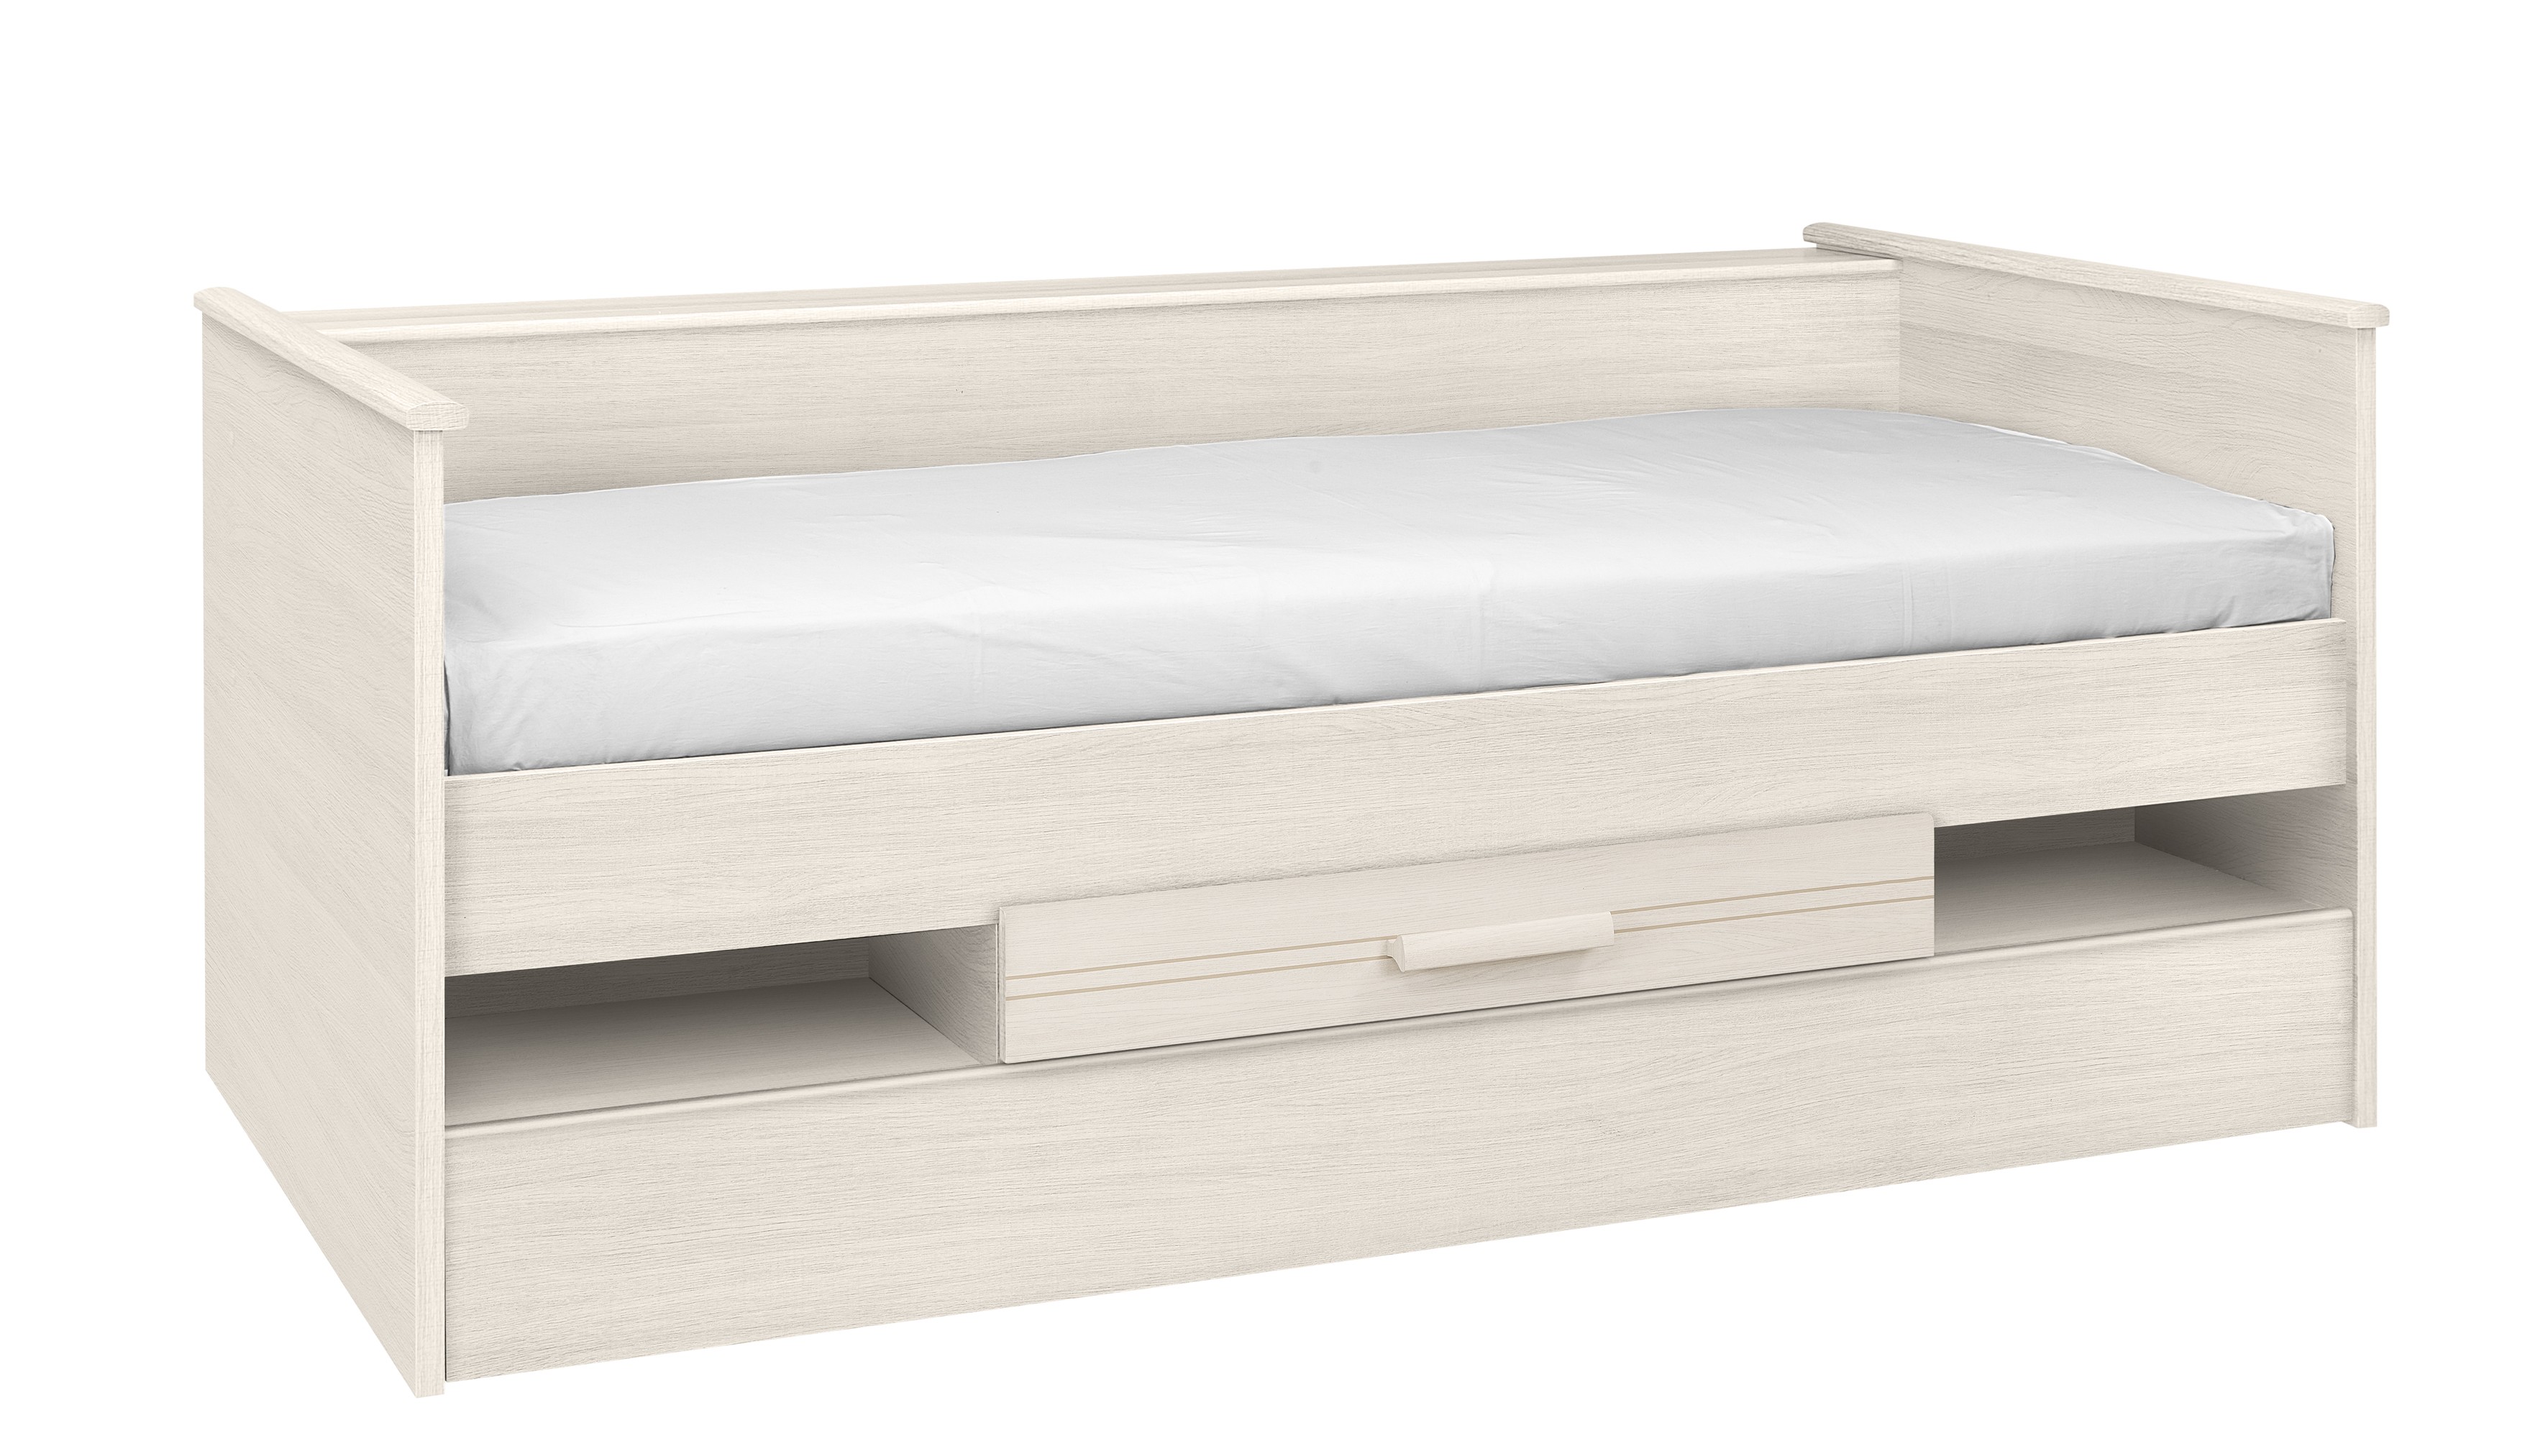 Gami Montana Bleached Ash Compact Bed